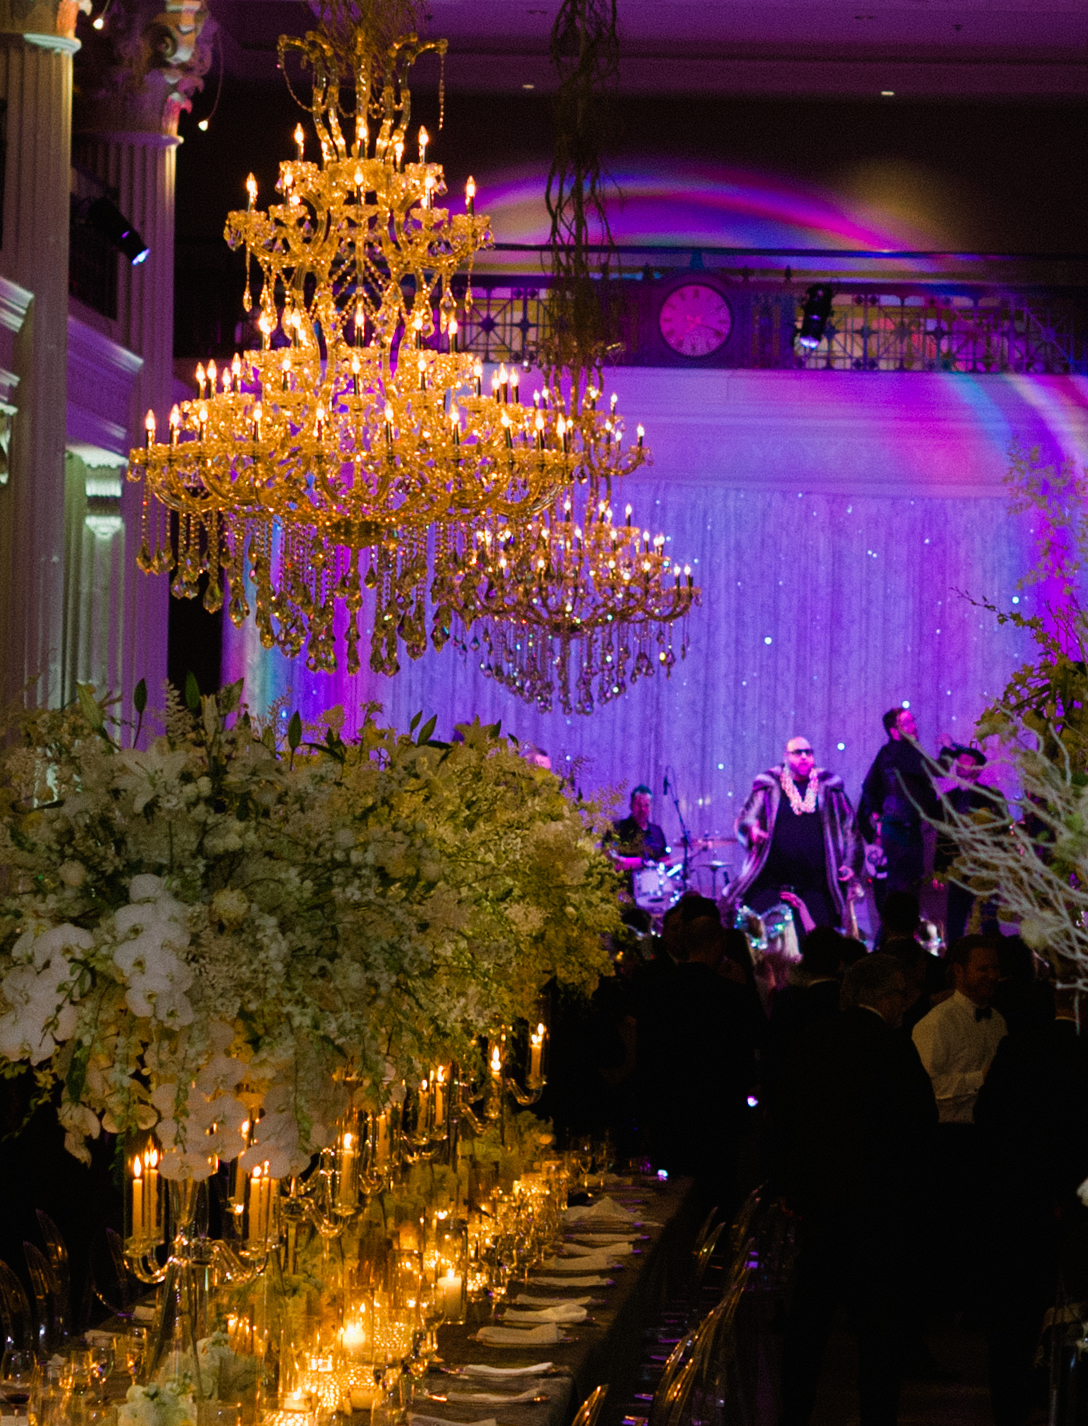 A reception room has a live band performing for a winter wedding in Houston. The room is dimly lit with a purple light shining on stage.